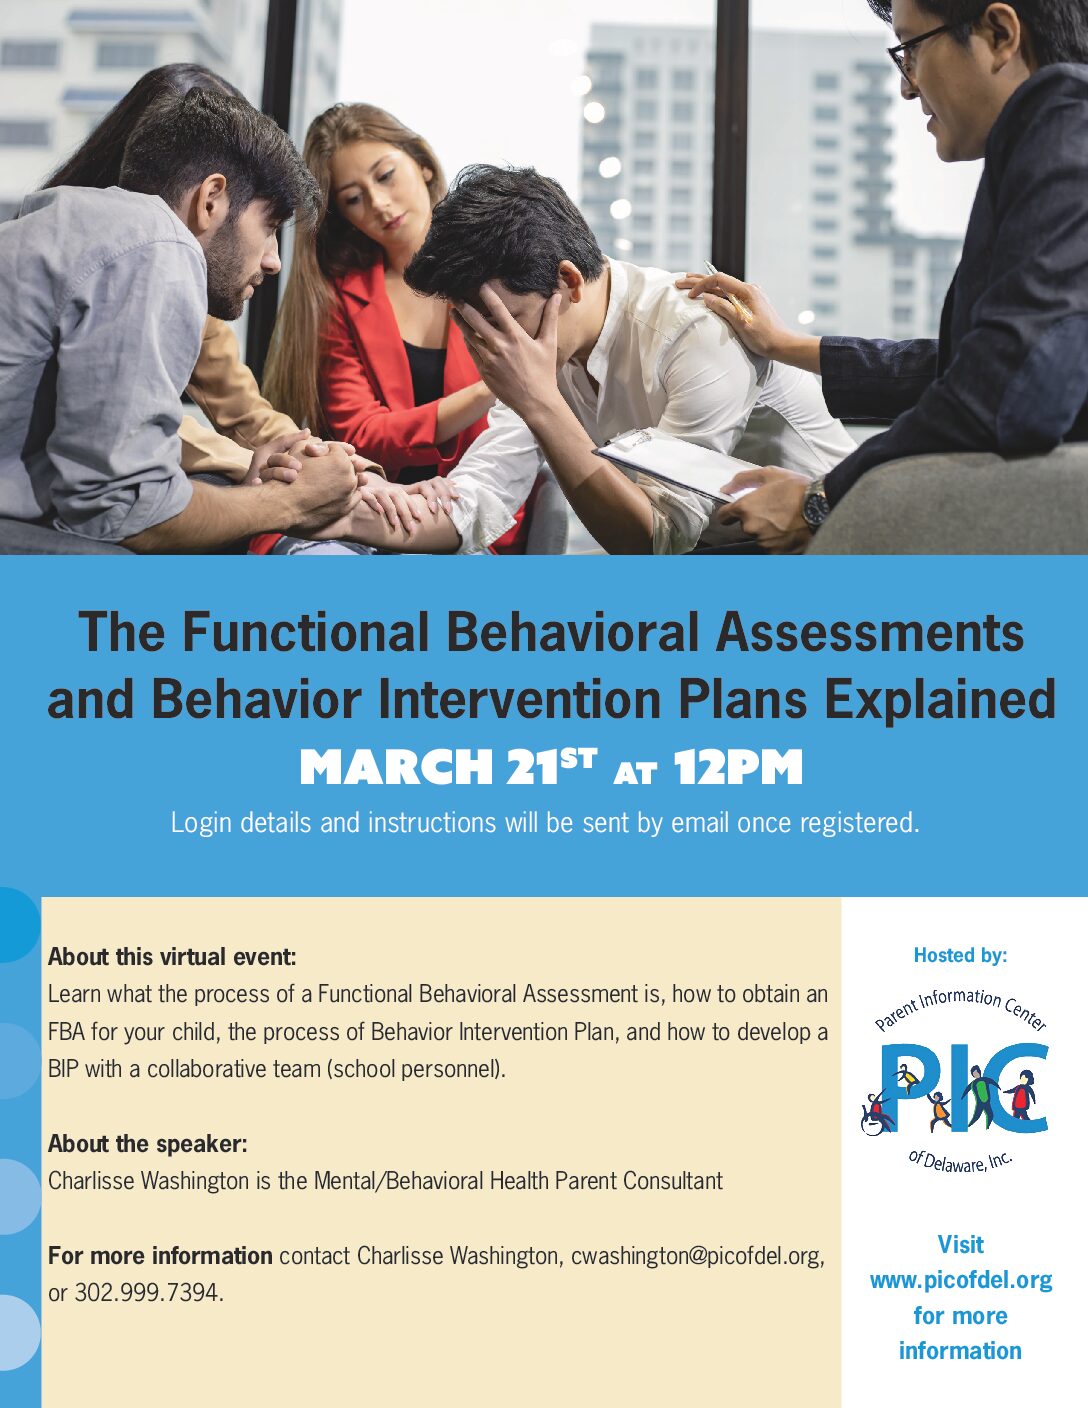 The Functional Behavioral Assessments and Behavior Intervention Plans Explained